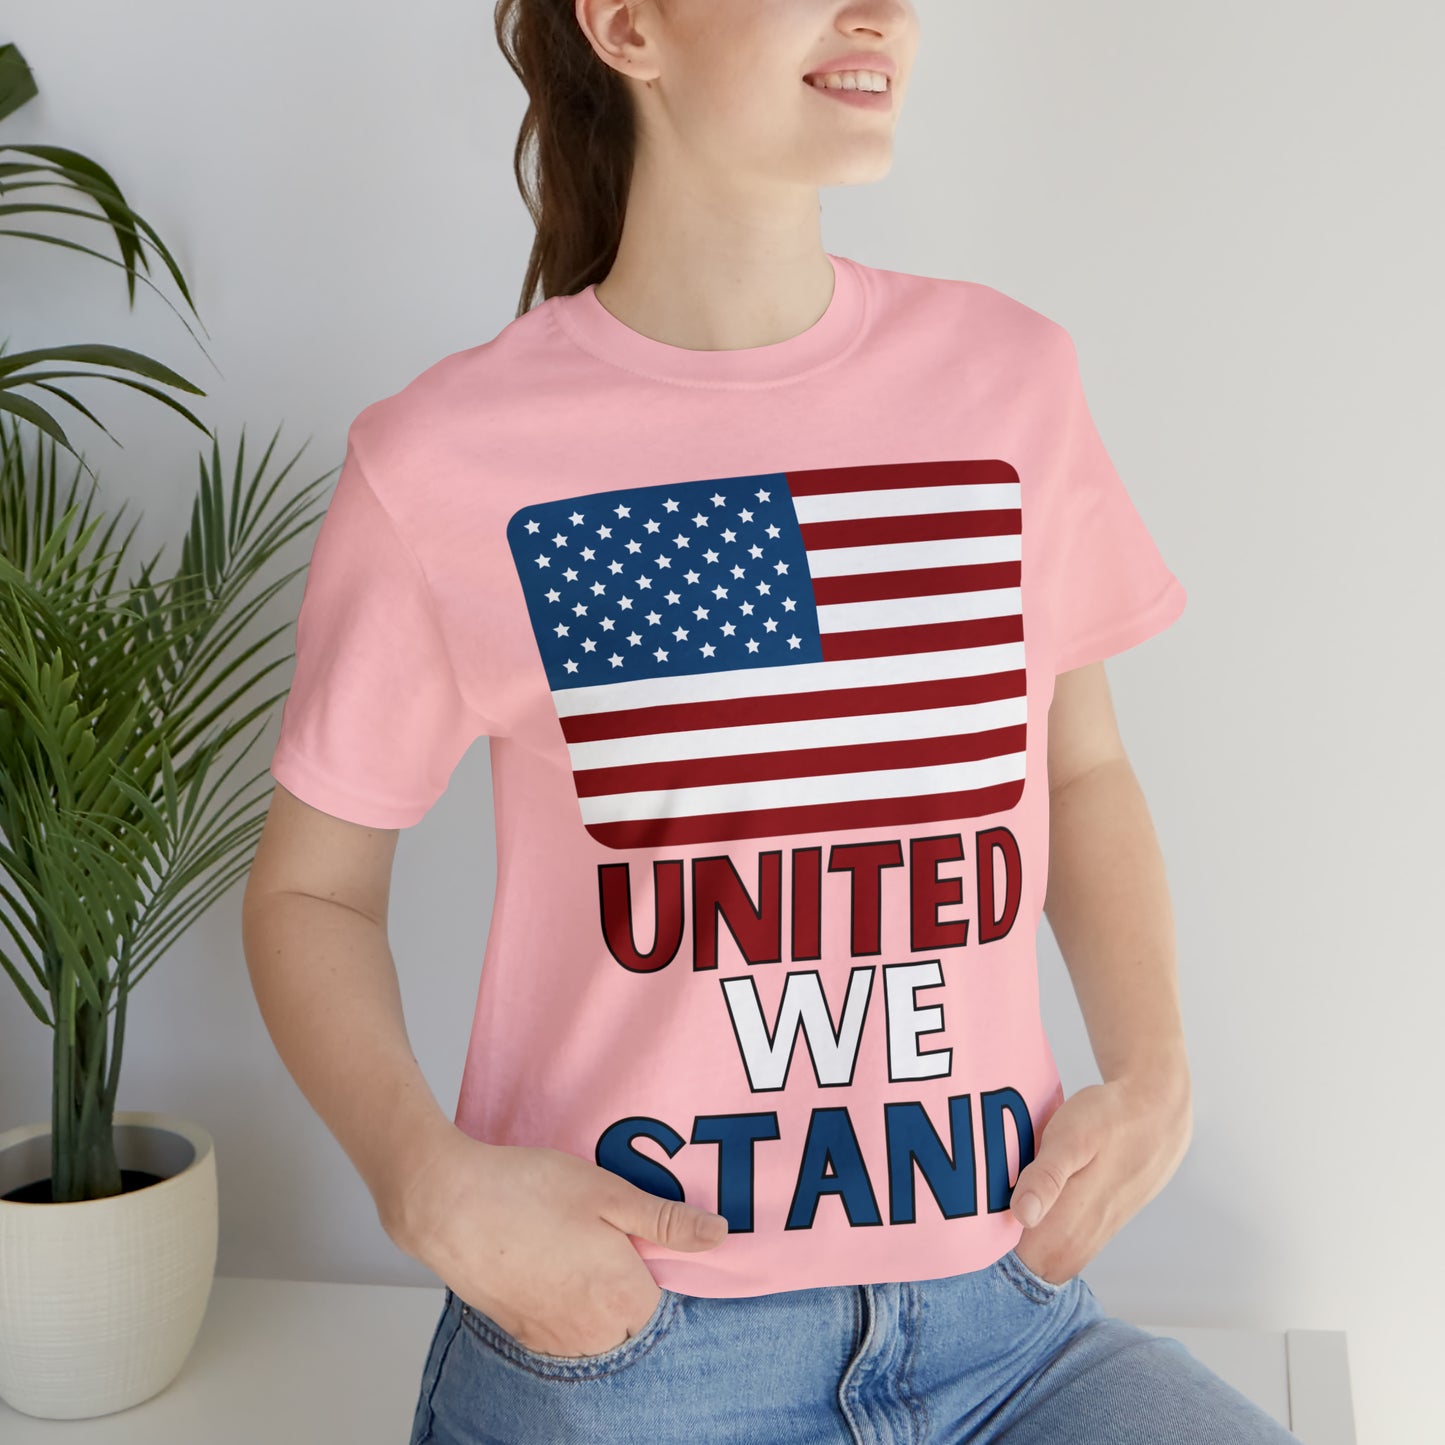 USA Flag shirt, 4th of July shirt, Independence Day shirt, United We Stand